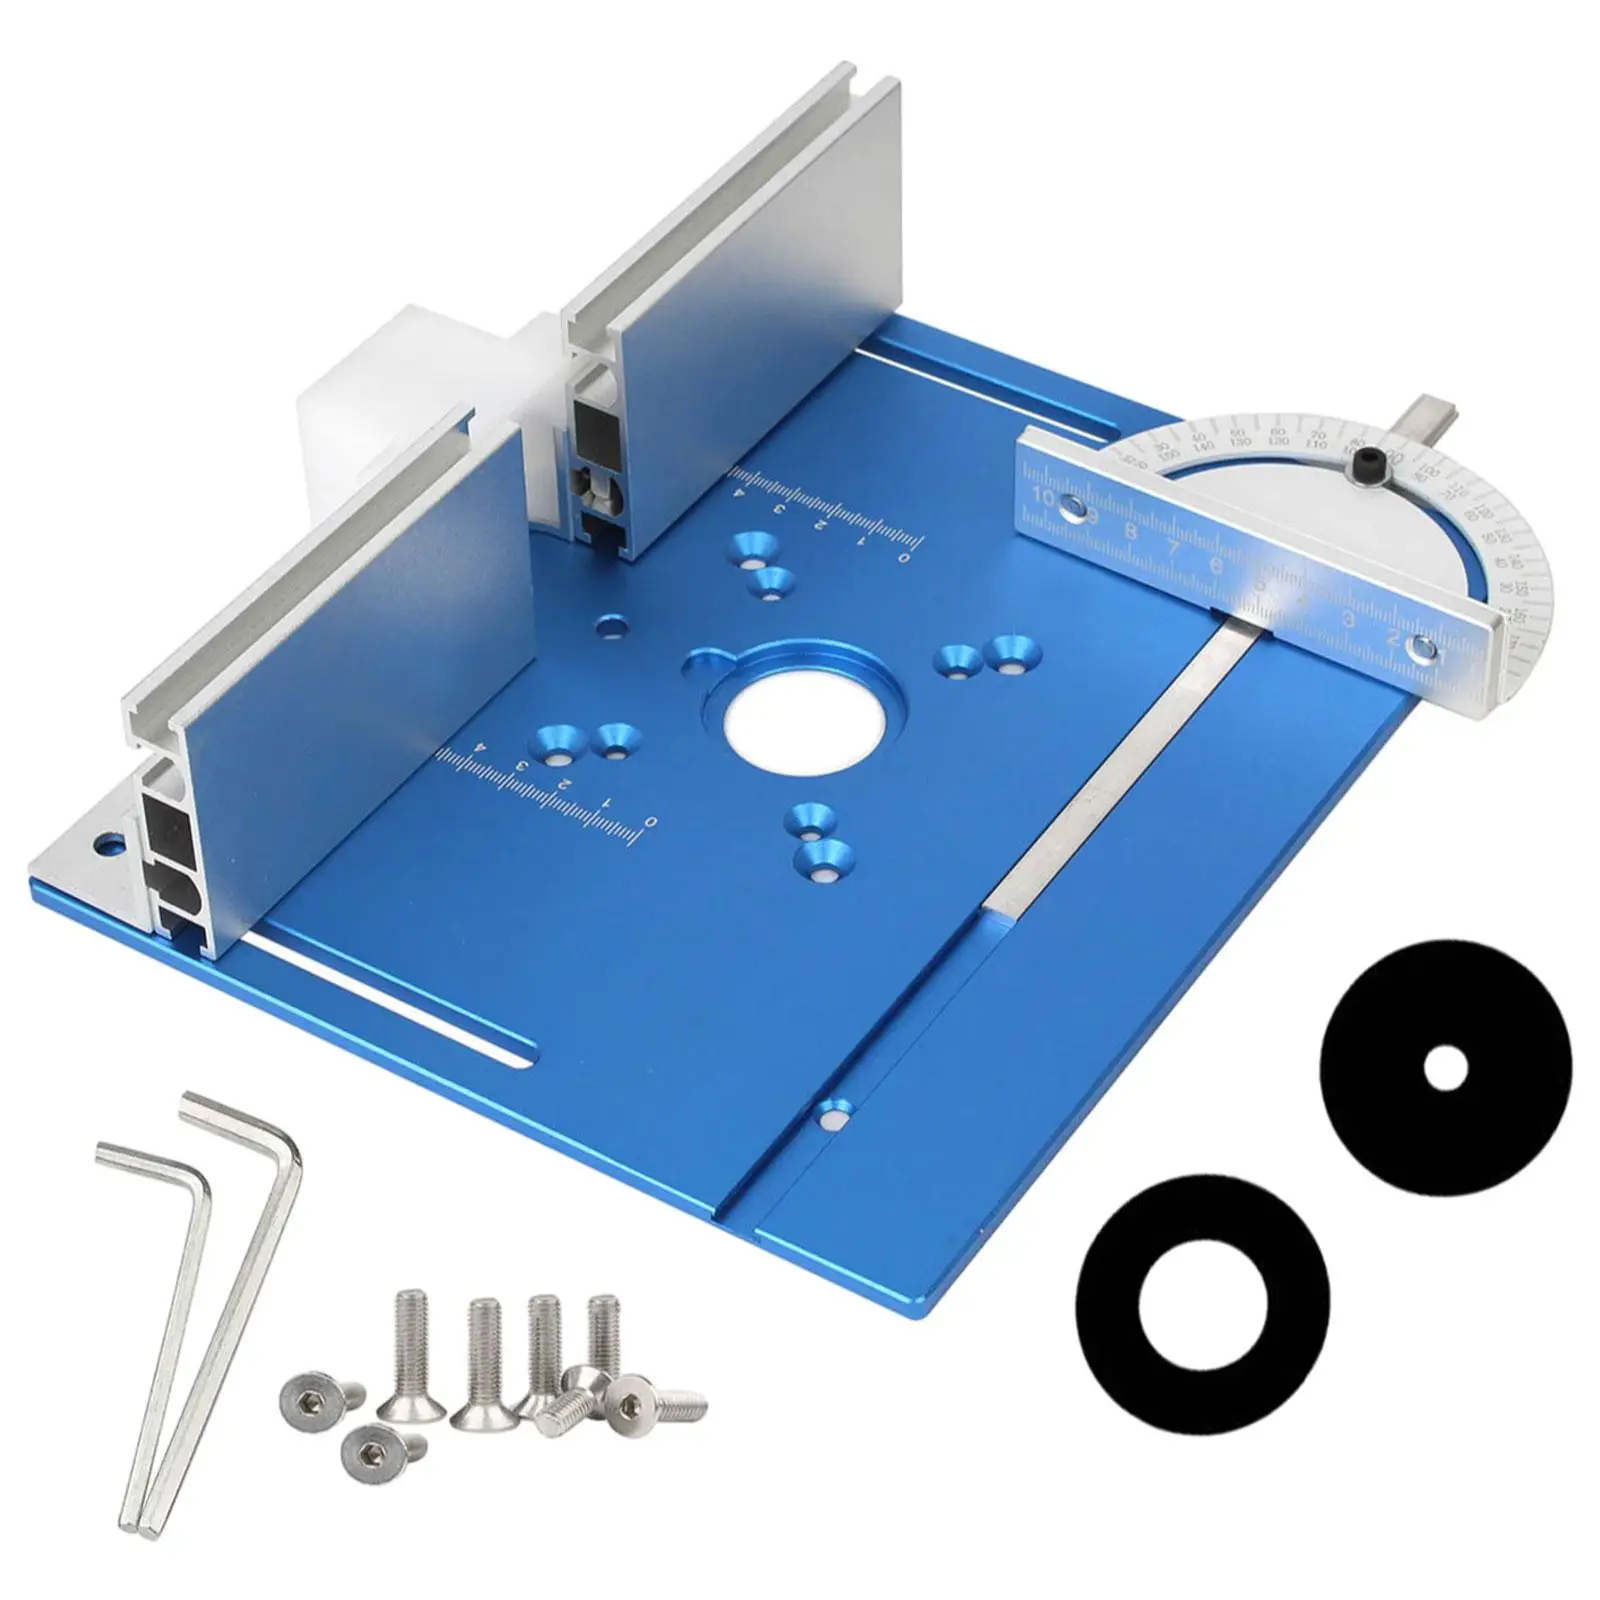 Aluminum Router Table Insert Woodworking Benches Wood Milling Flip Board Trimmer Tool for Engraving Machine Trimming Machine